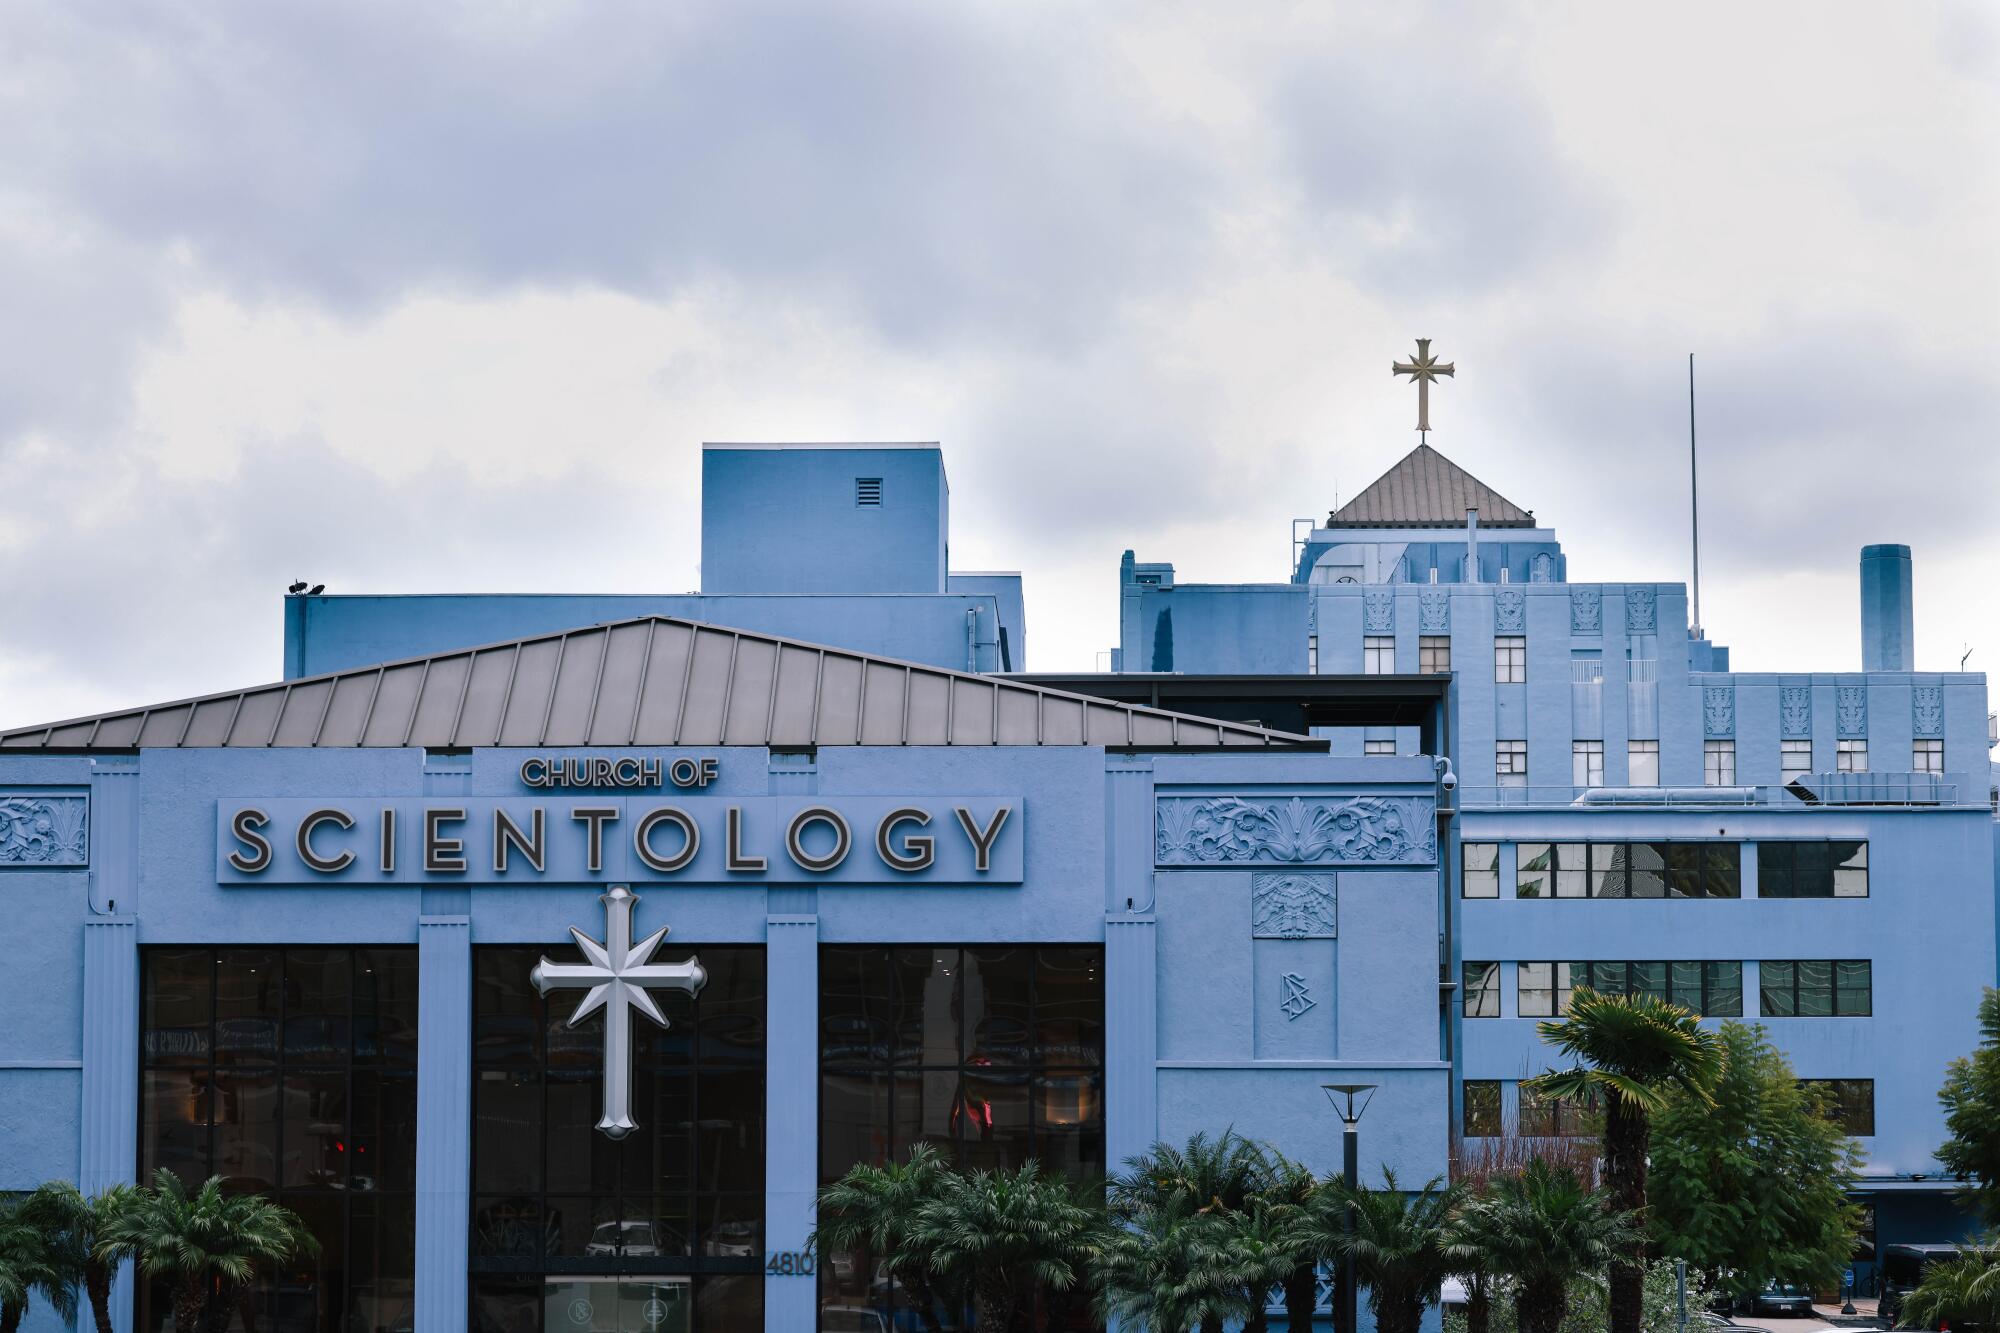 The Church of Scientology of Los Angeles